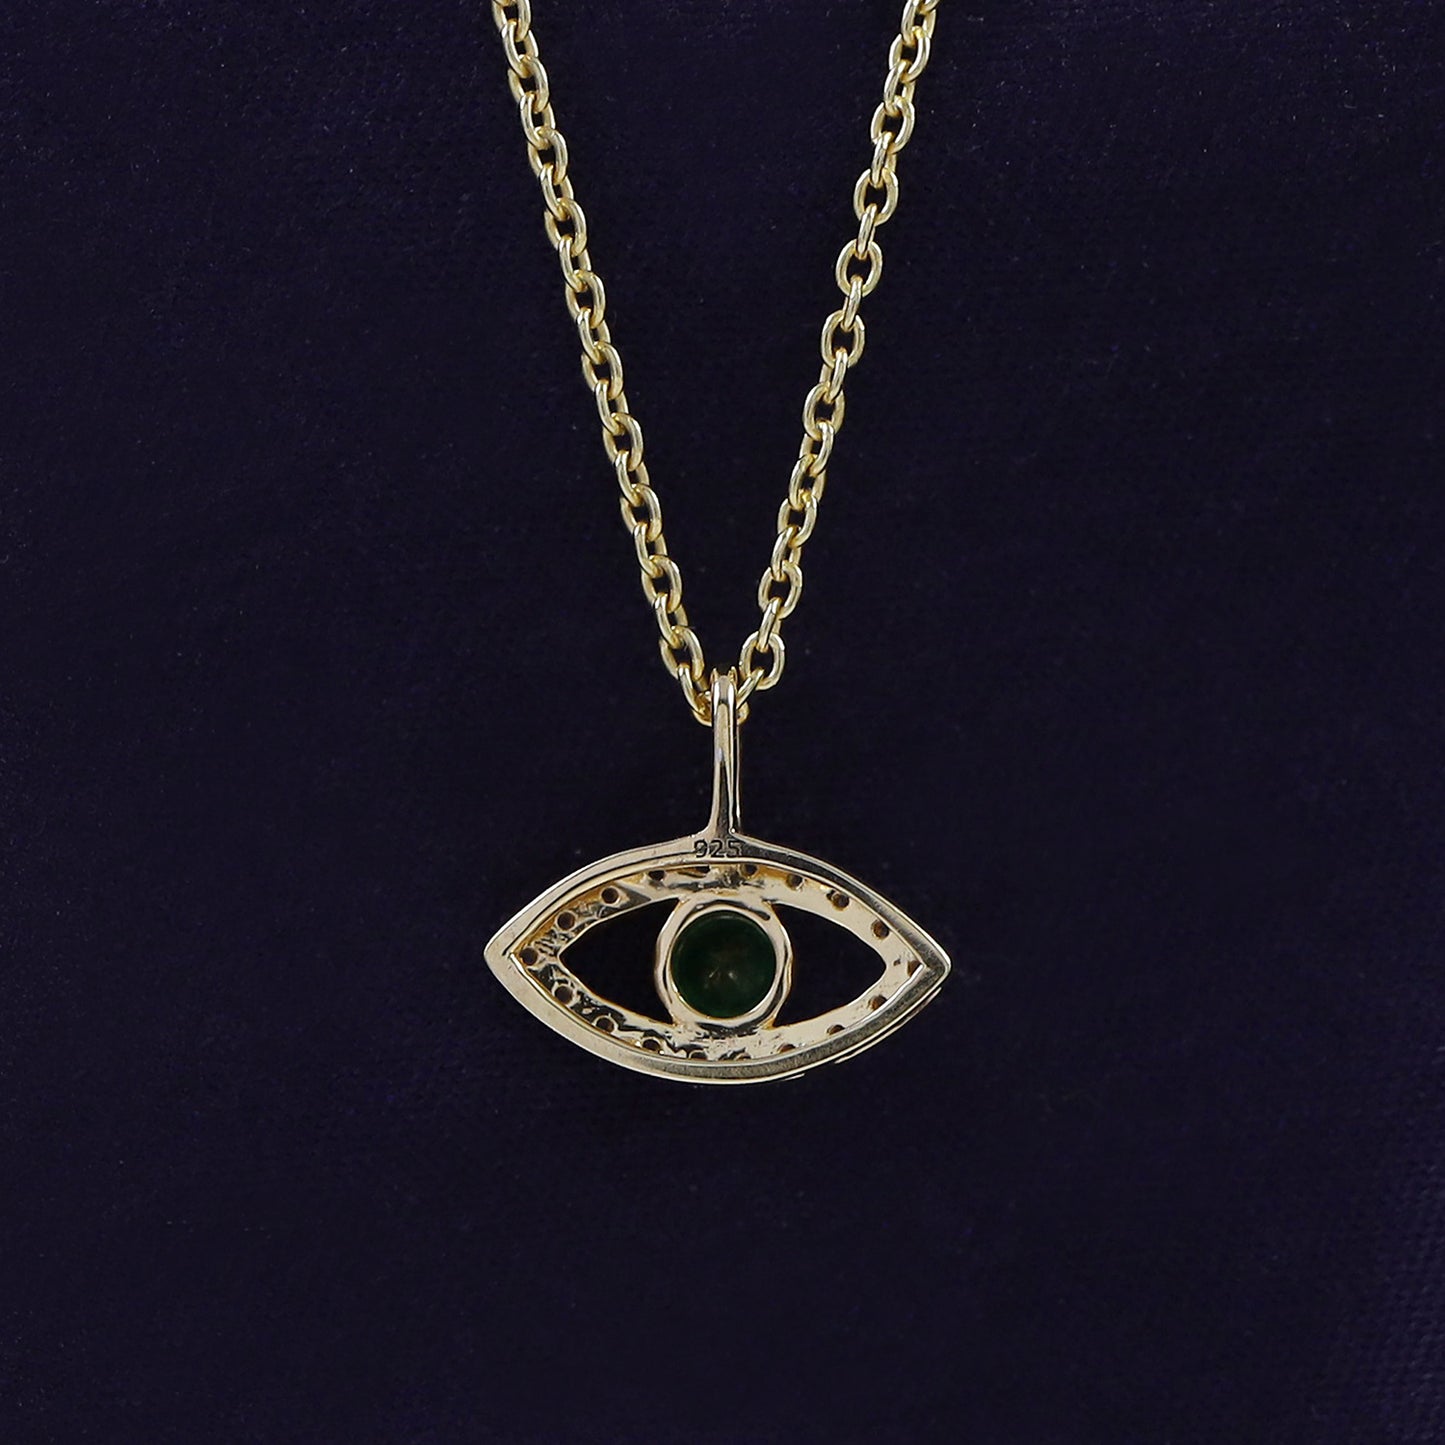 Round Cut White Cubic Zirconia & Simulated Green Emerald Evil Eye Pendant Necklace for Women In 10K Or 14K Solid Gold And 925 Sterling Silver